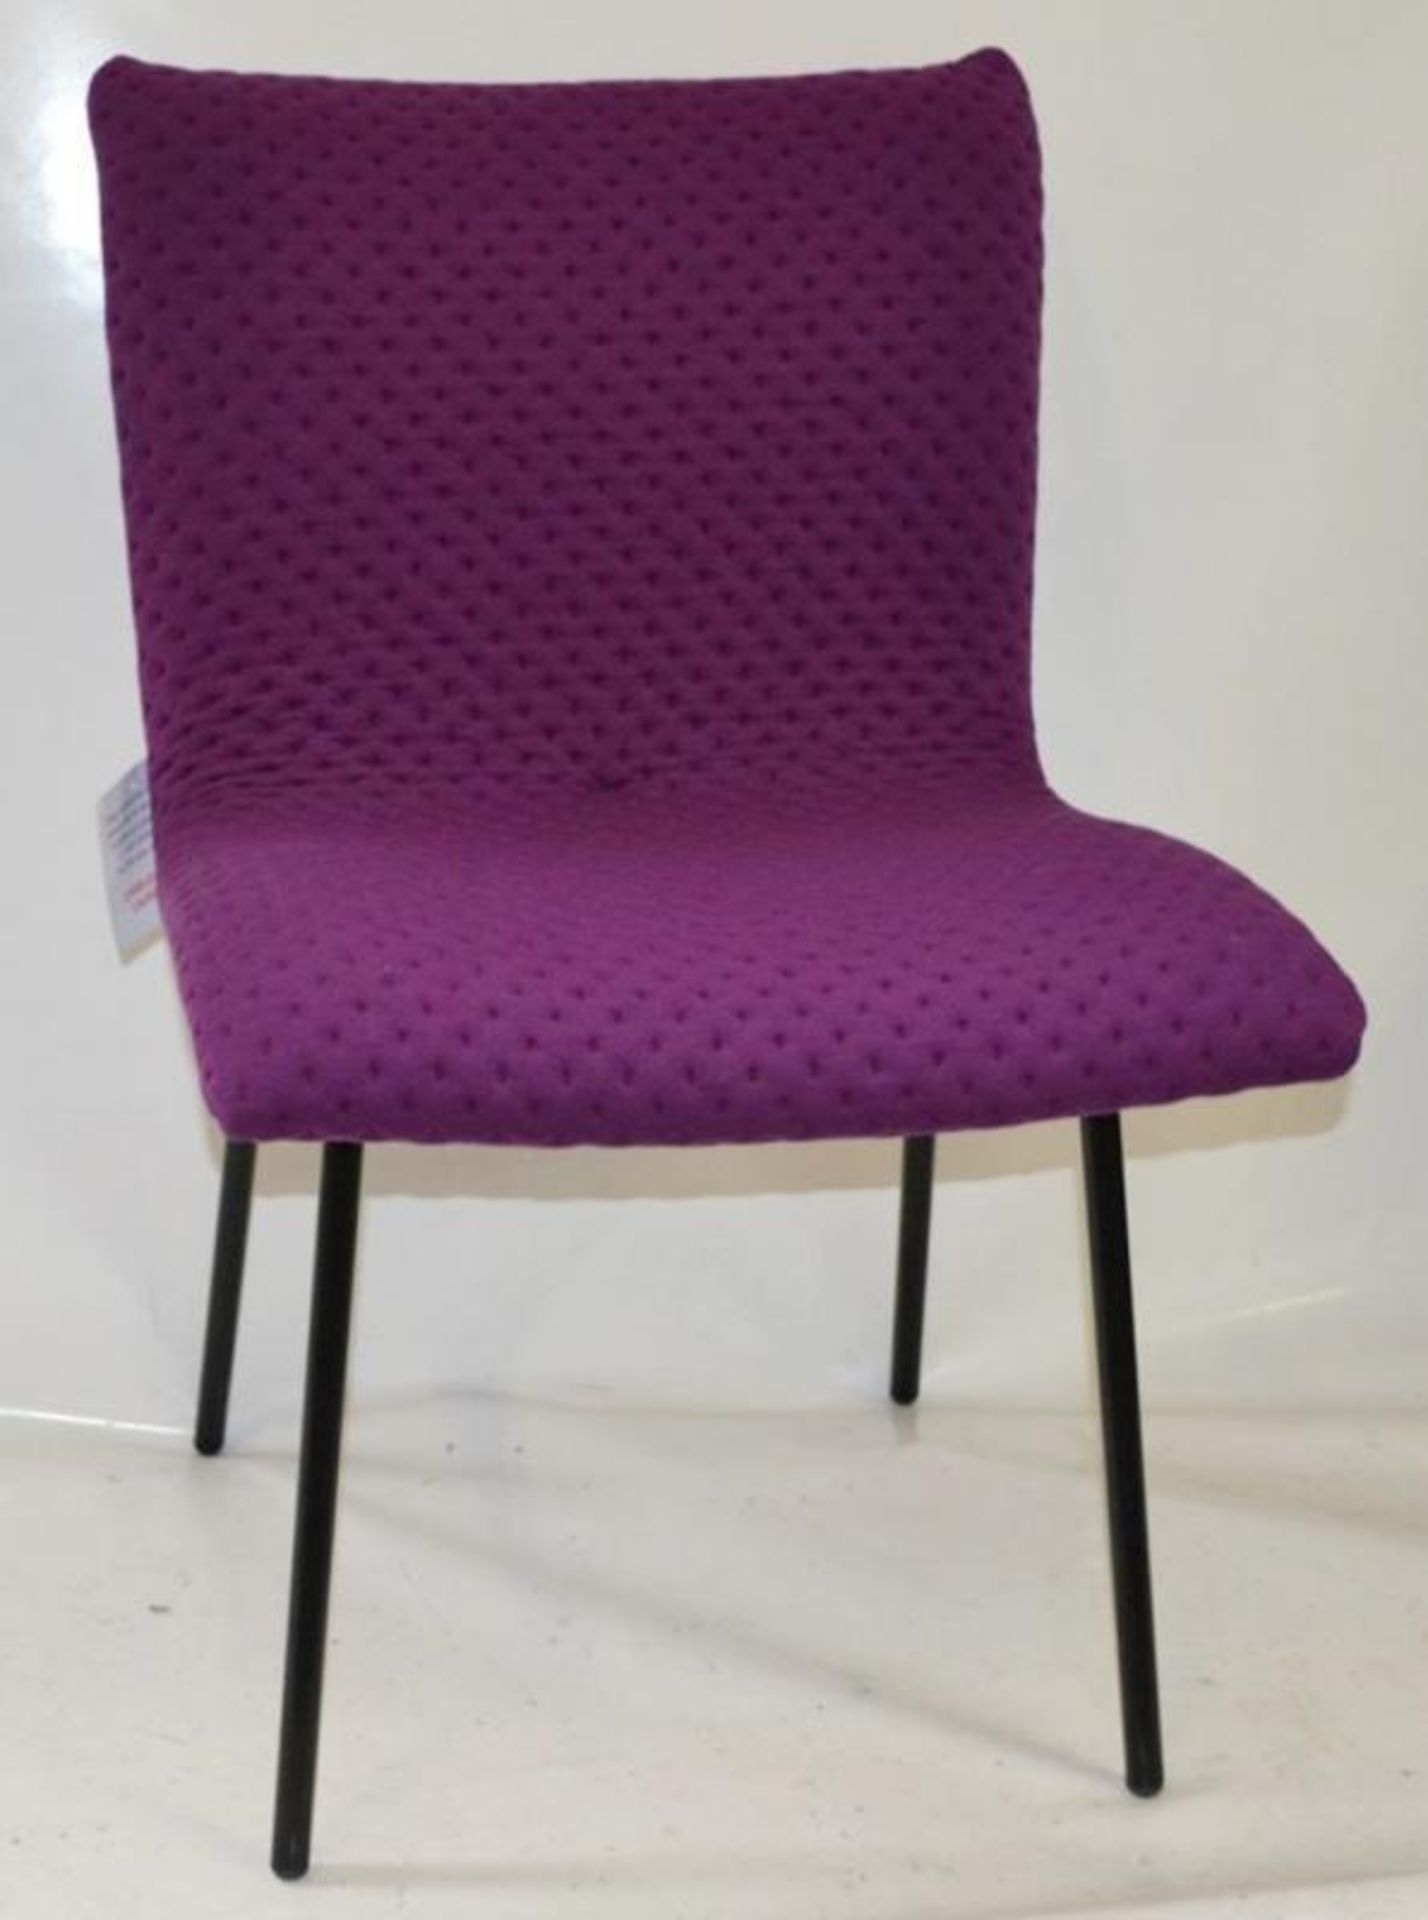 1 x Ligne Roset 'Calin' Chair - Features Bright Purple Upholsterey - Made In France - Ref: 6206608 P - Image 5 of 7